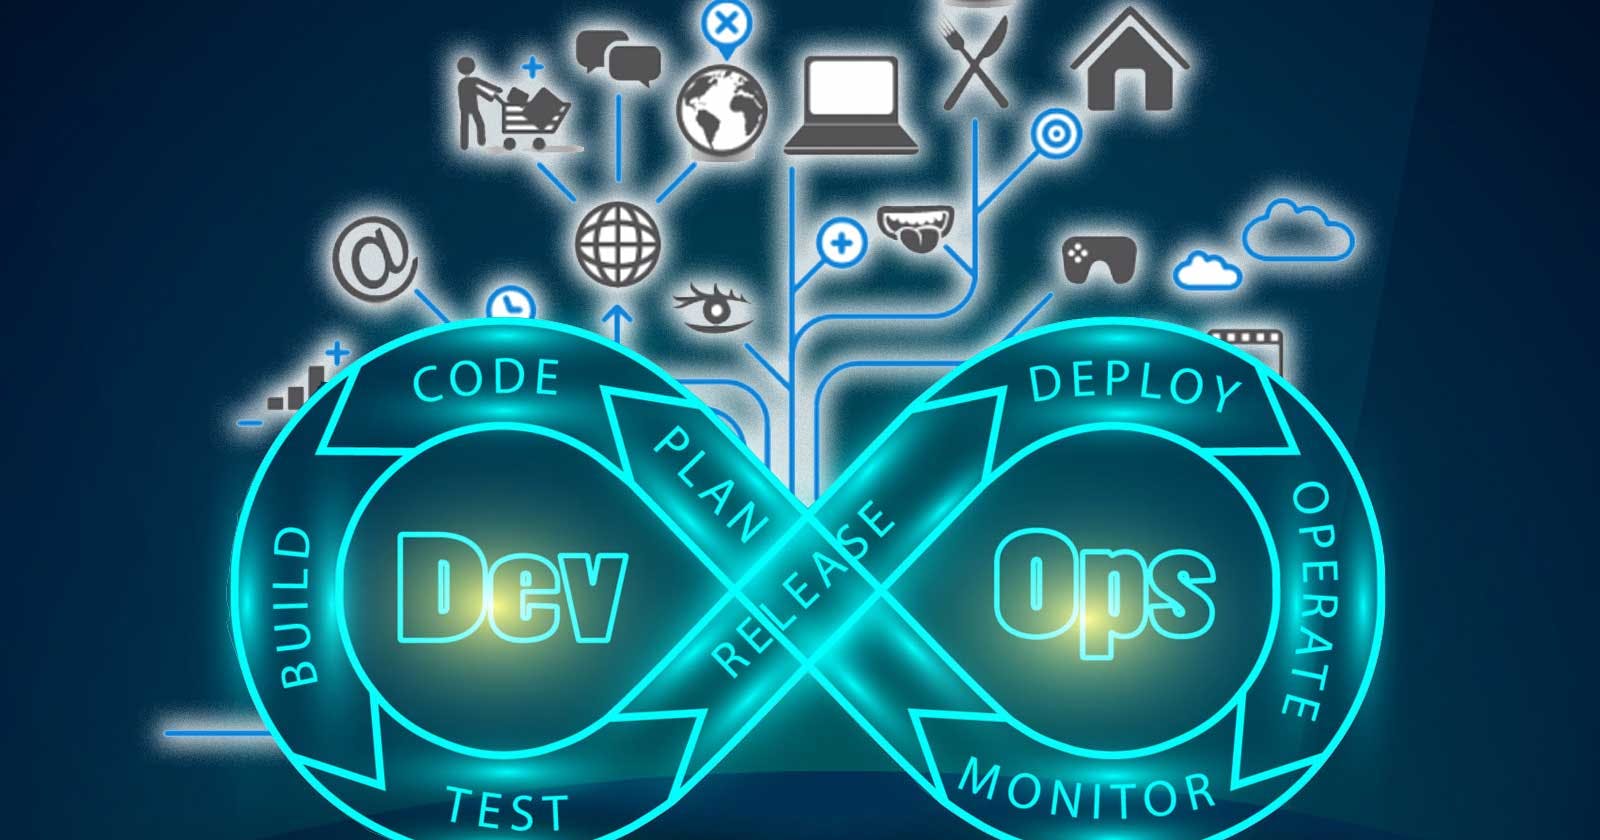 What Does DevOps Actually Mean?